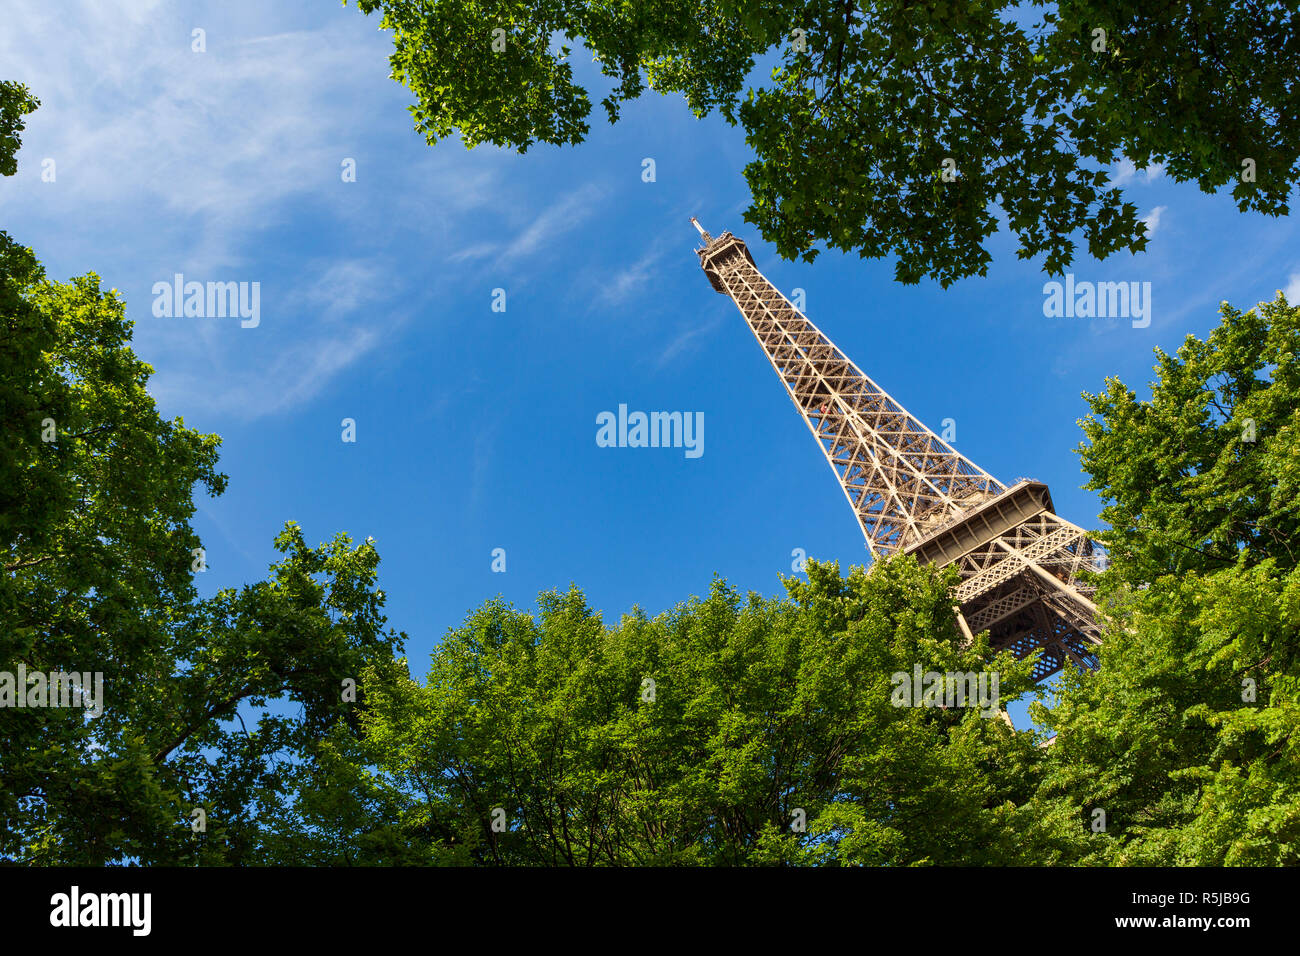 The Eiffel Tower, a wrought-iron lattice tower on the Champ de Mars in Paris, France. Stock Photo